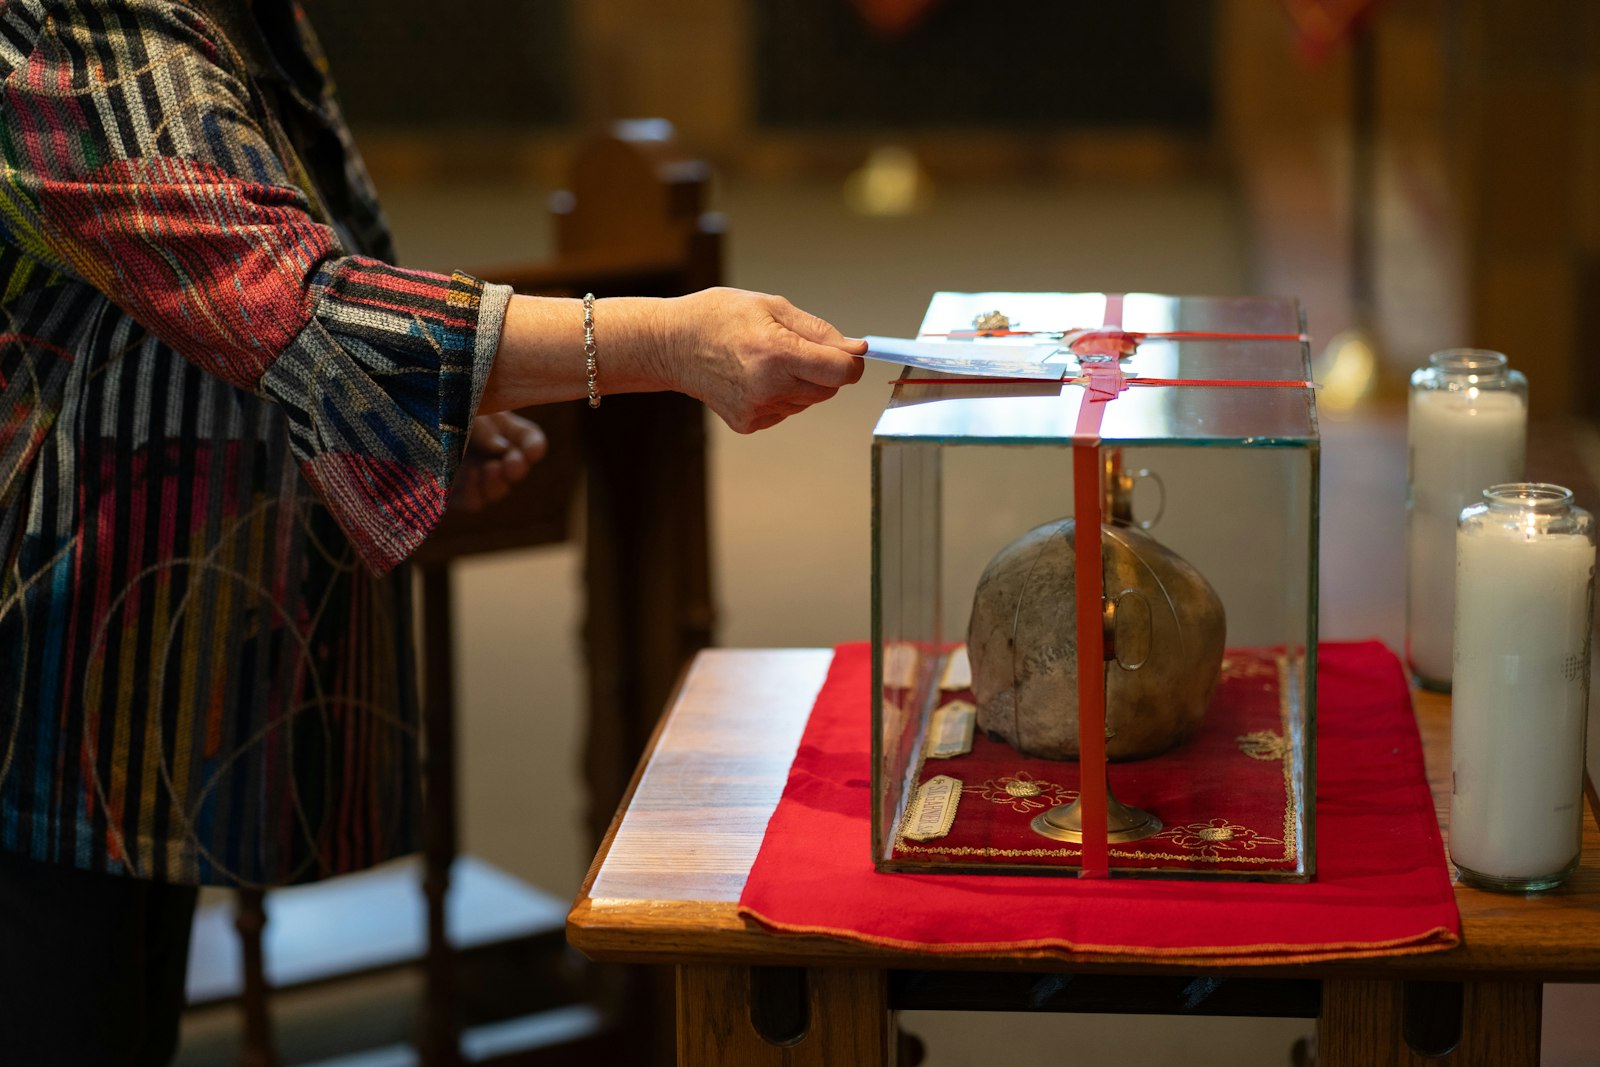 The faithful placed holy cards, rosaries and personal items on the glass container which housed the relics of Sts. Jean de Brebeuf, Charles Garnier and Gabriel Lalemant.